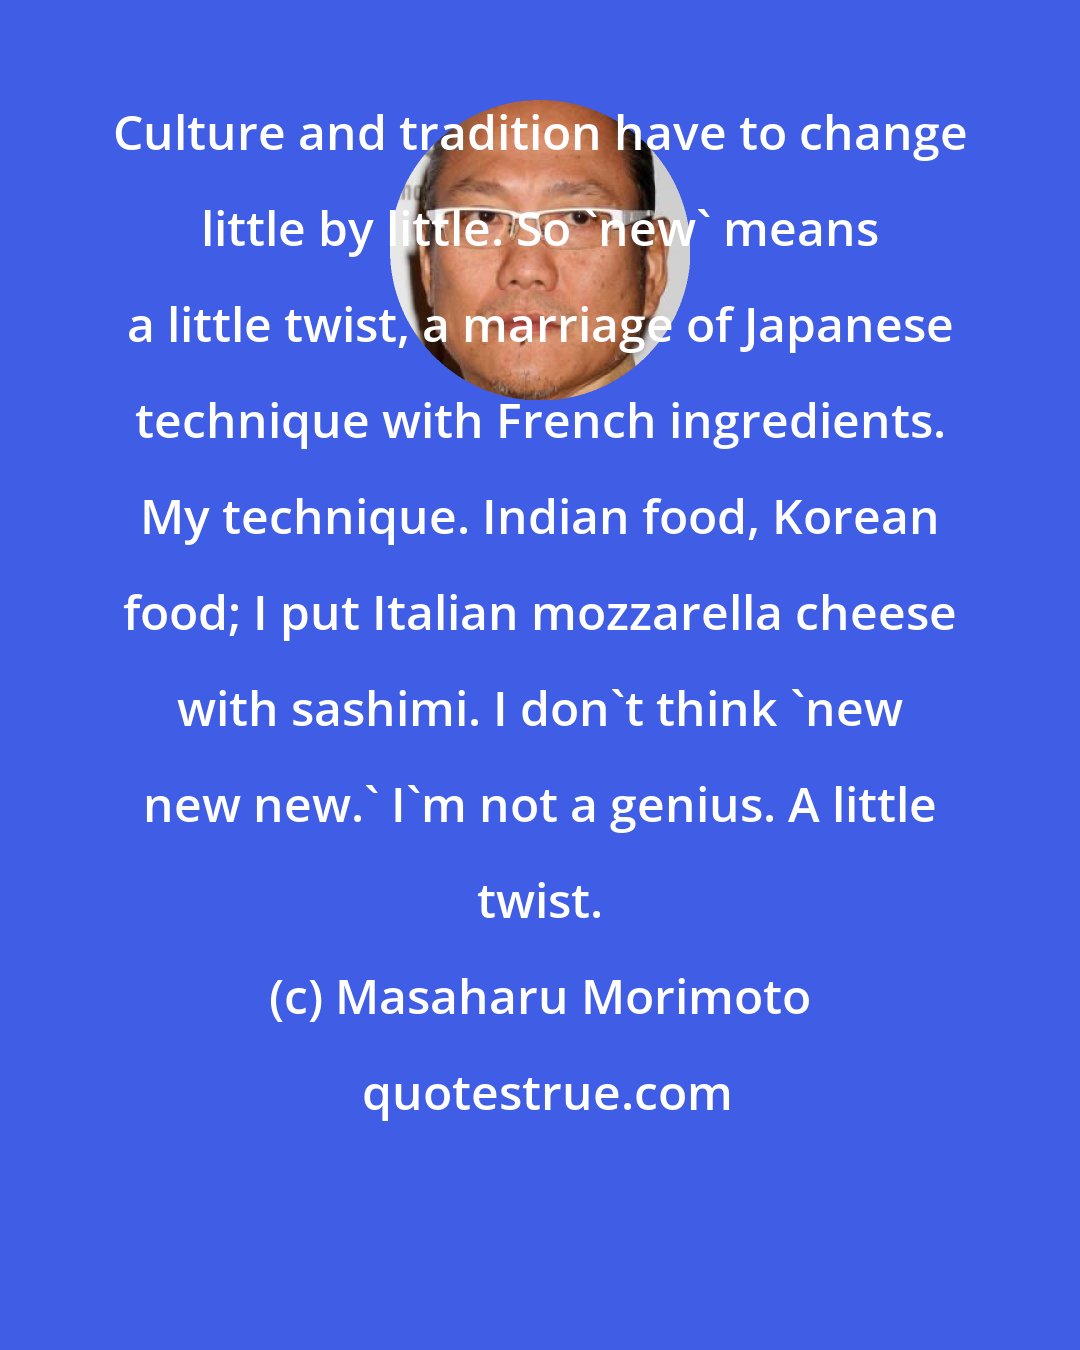 Masaharu Morimoto: Culture and tradition have to change little by little. So 'new' means a little twist, a marriage of Japanese technique with French ingredients. My technique. Indian food, Korean food; I put Italian mozzarella cheese with sashimi. I don't think 'new new new.' I'm not a genius. A little twist.